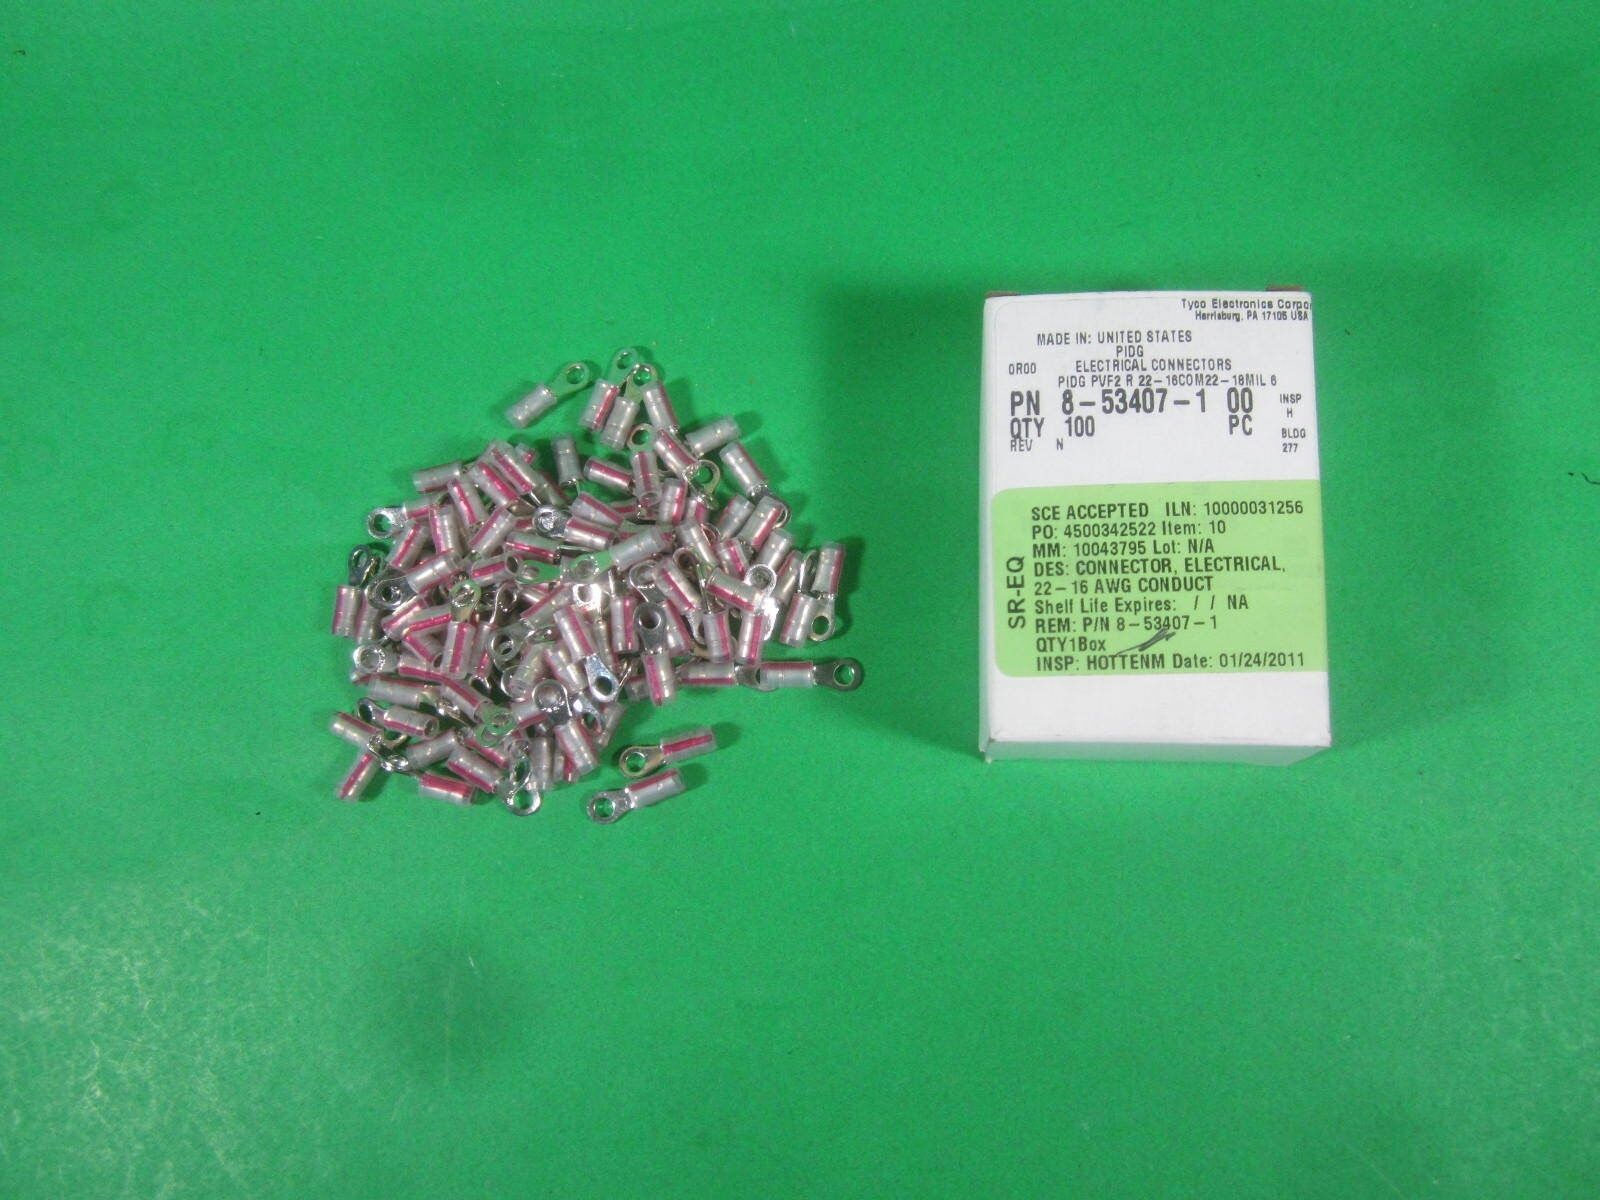 Tyco Electronics Electrical Connector -- 8-53407-1 -- (Lot of 100) New